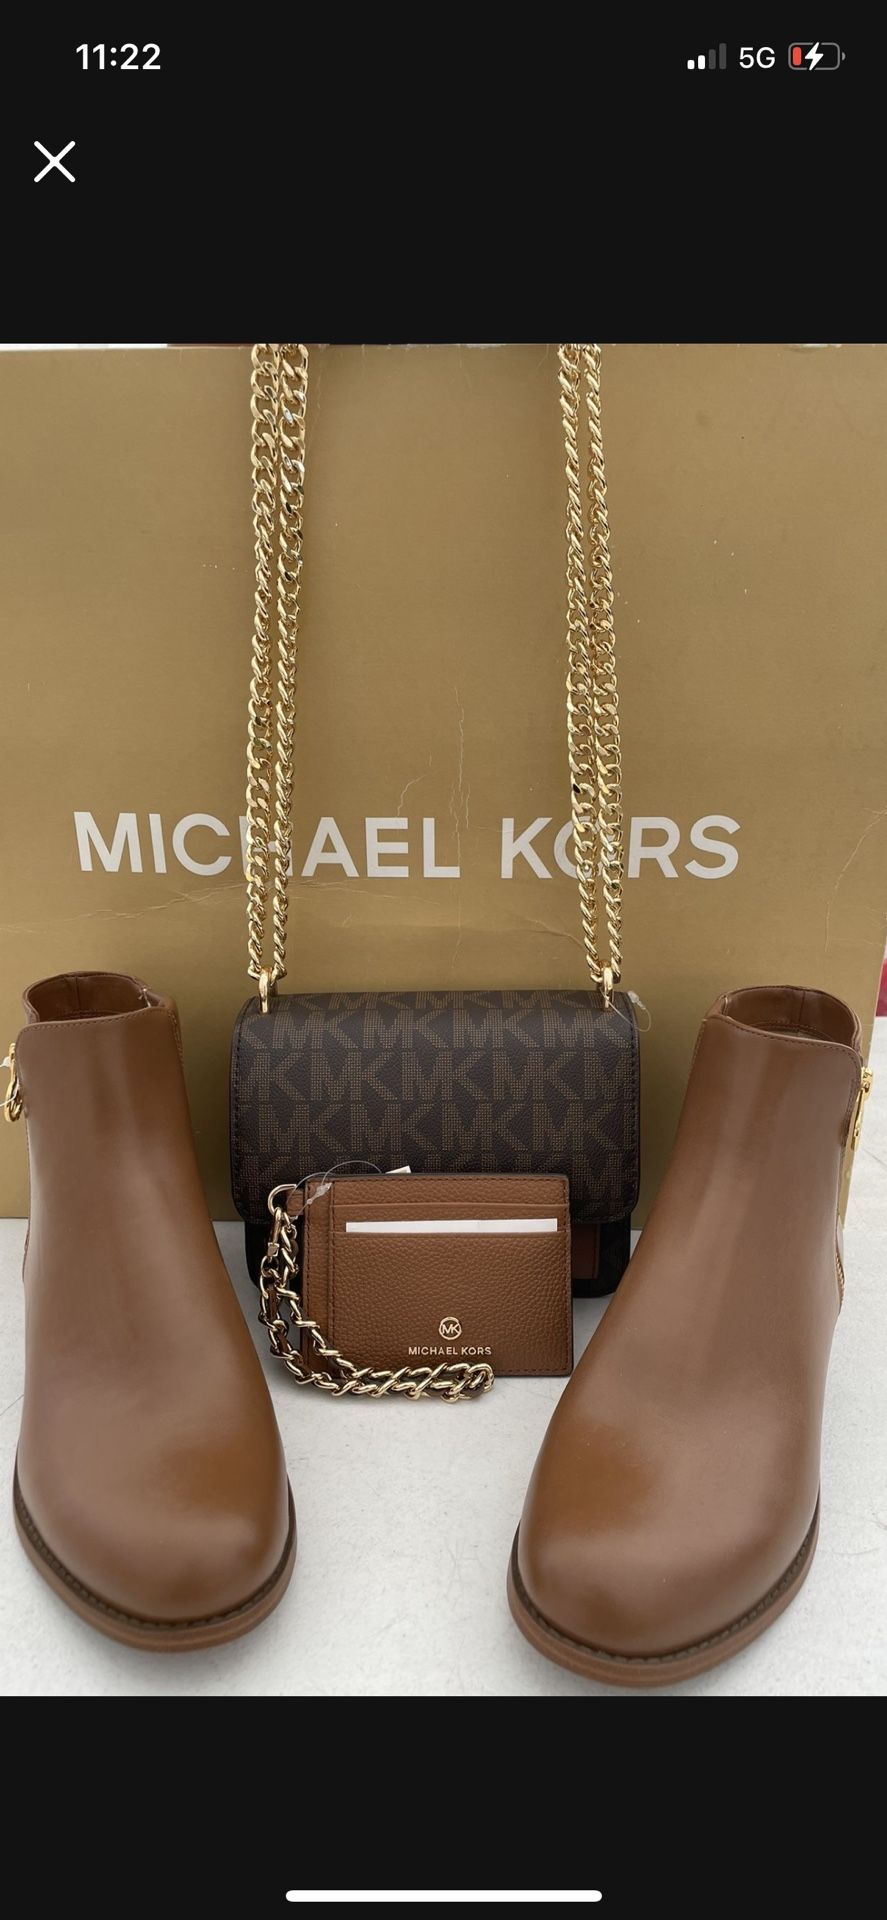 Perfect gift 🎁  Michael Kors set NWT Michael Kors small purse & Michael Kors heel ankle boots- Women's - Black/Brown size 8 serious inquiries only  P